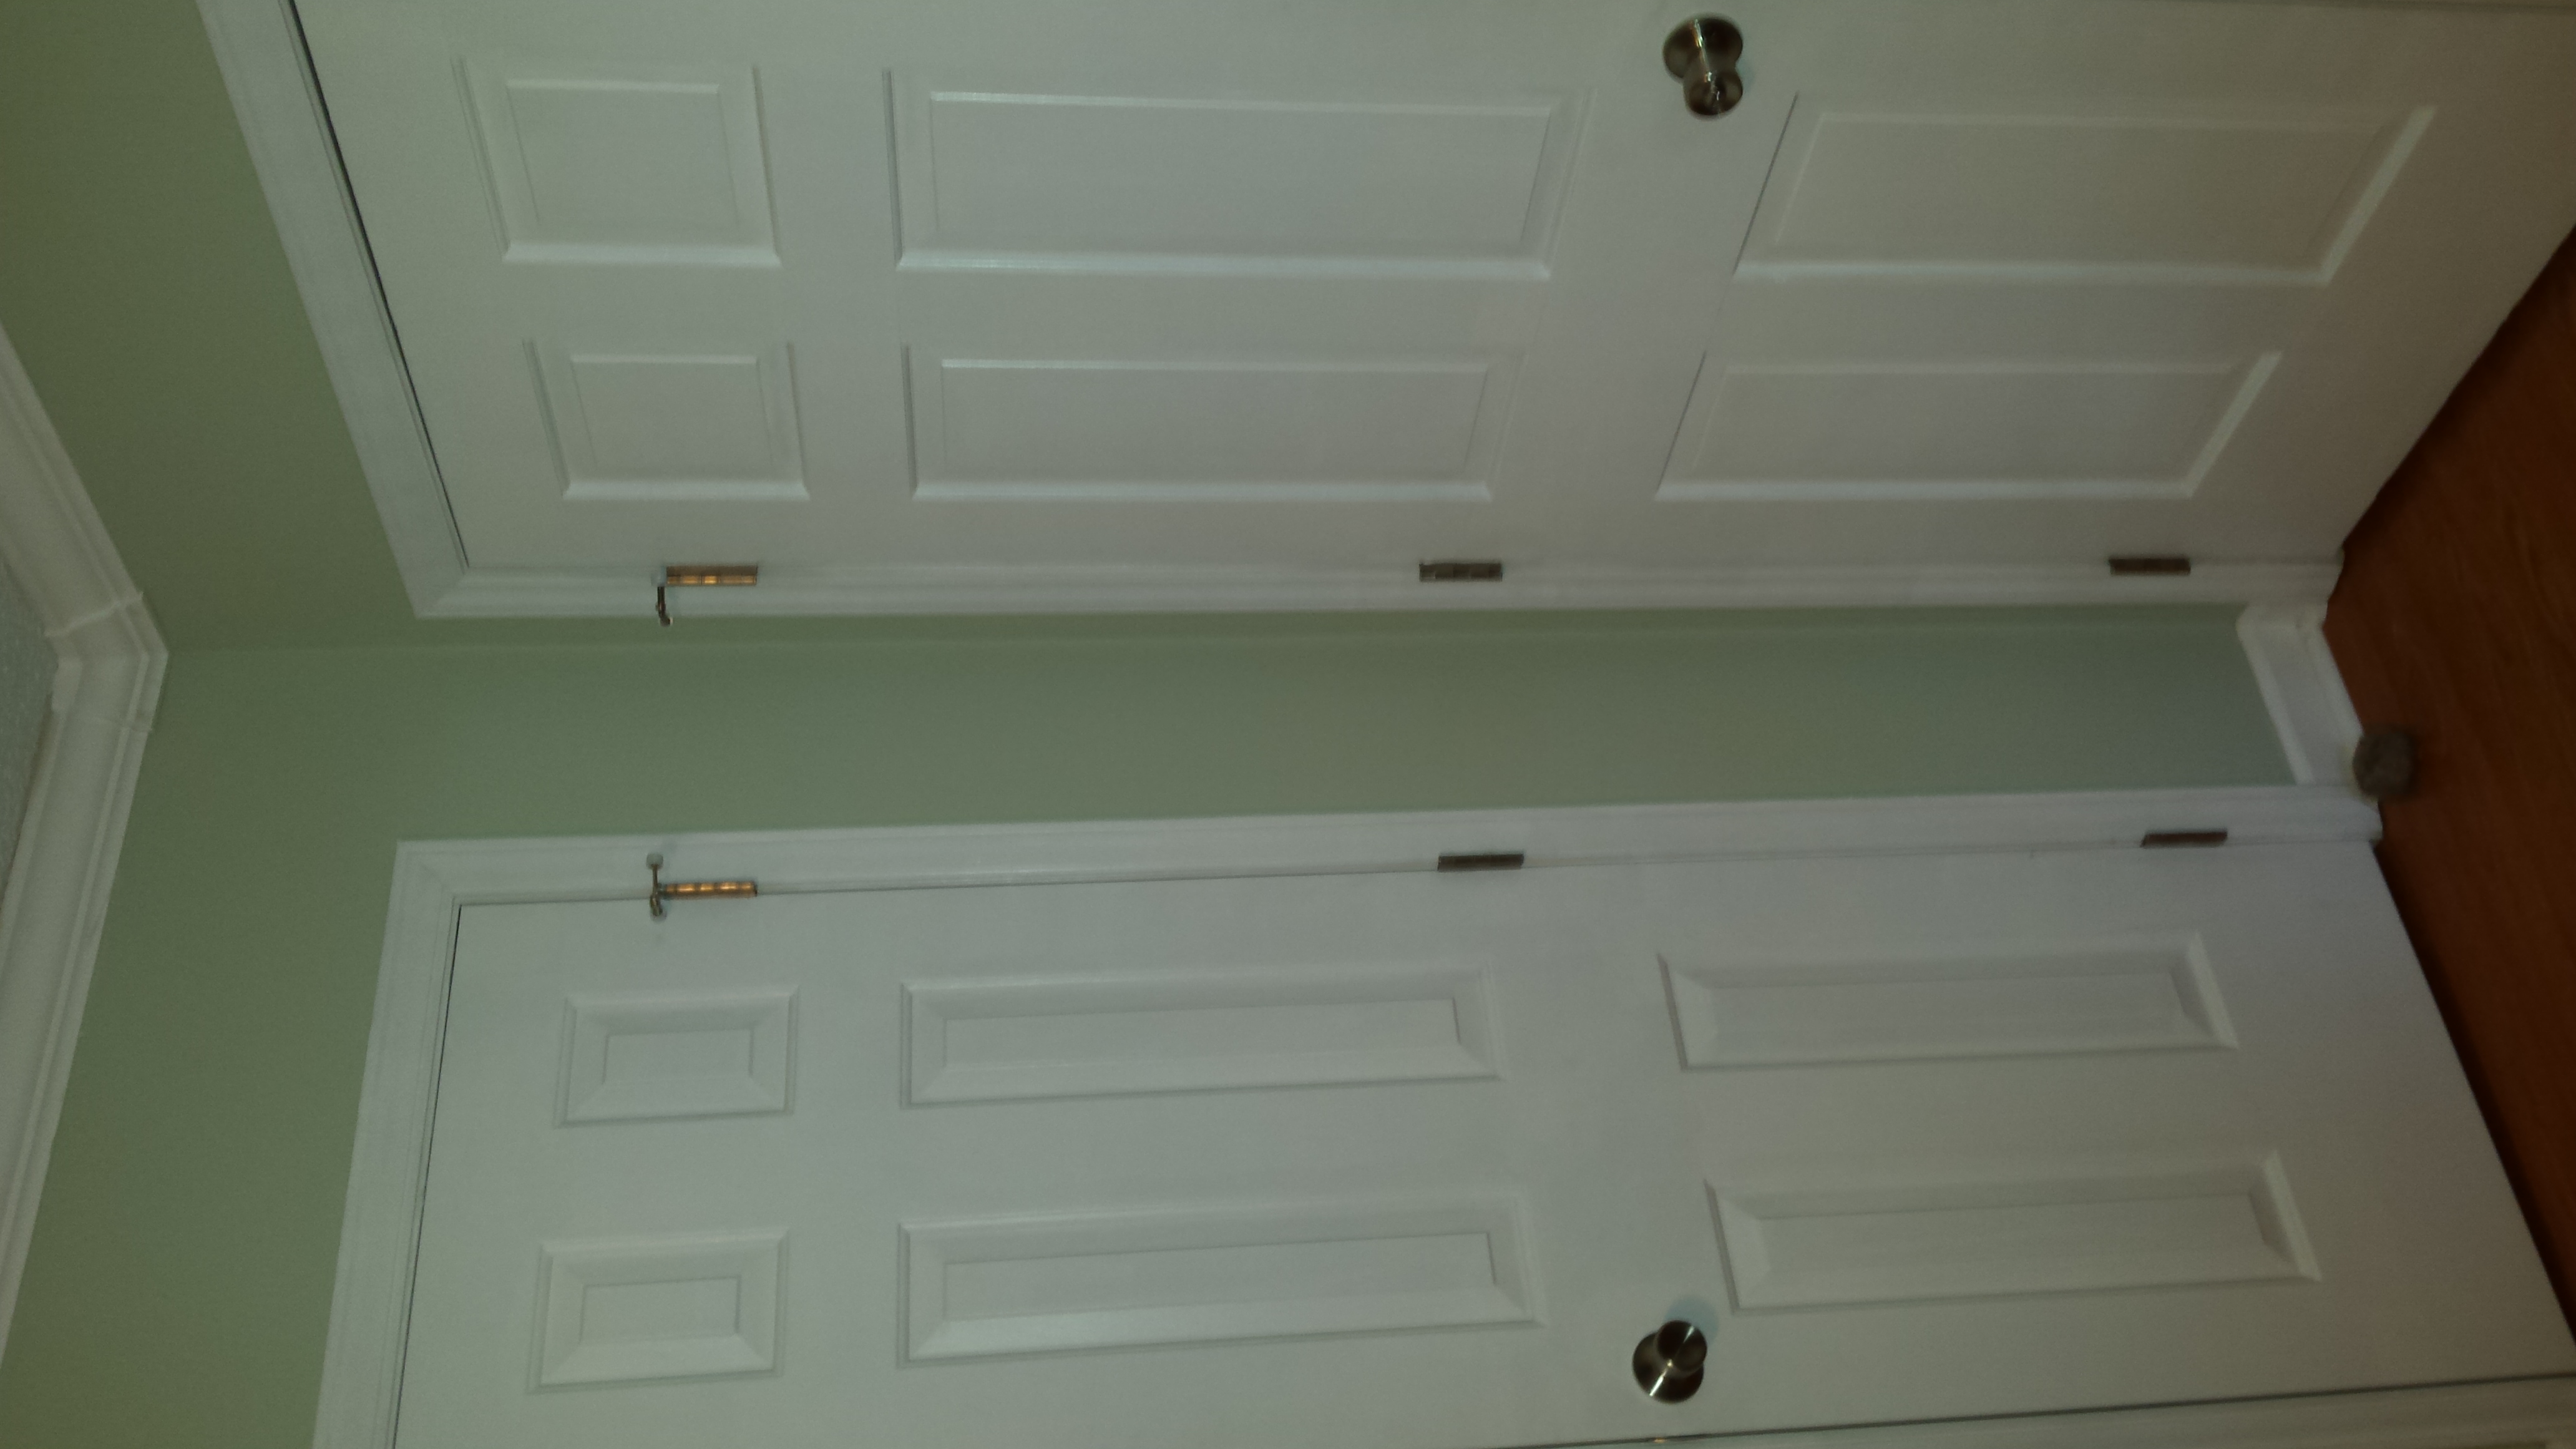  Changed door knobs and hinges 